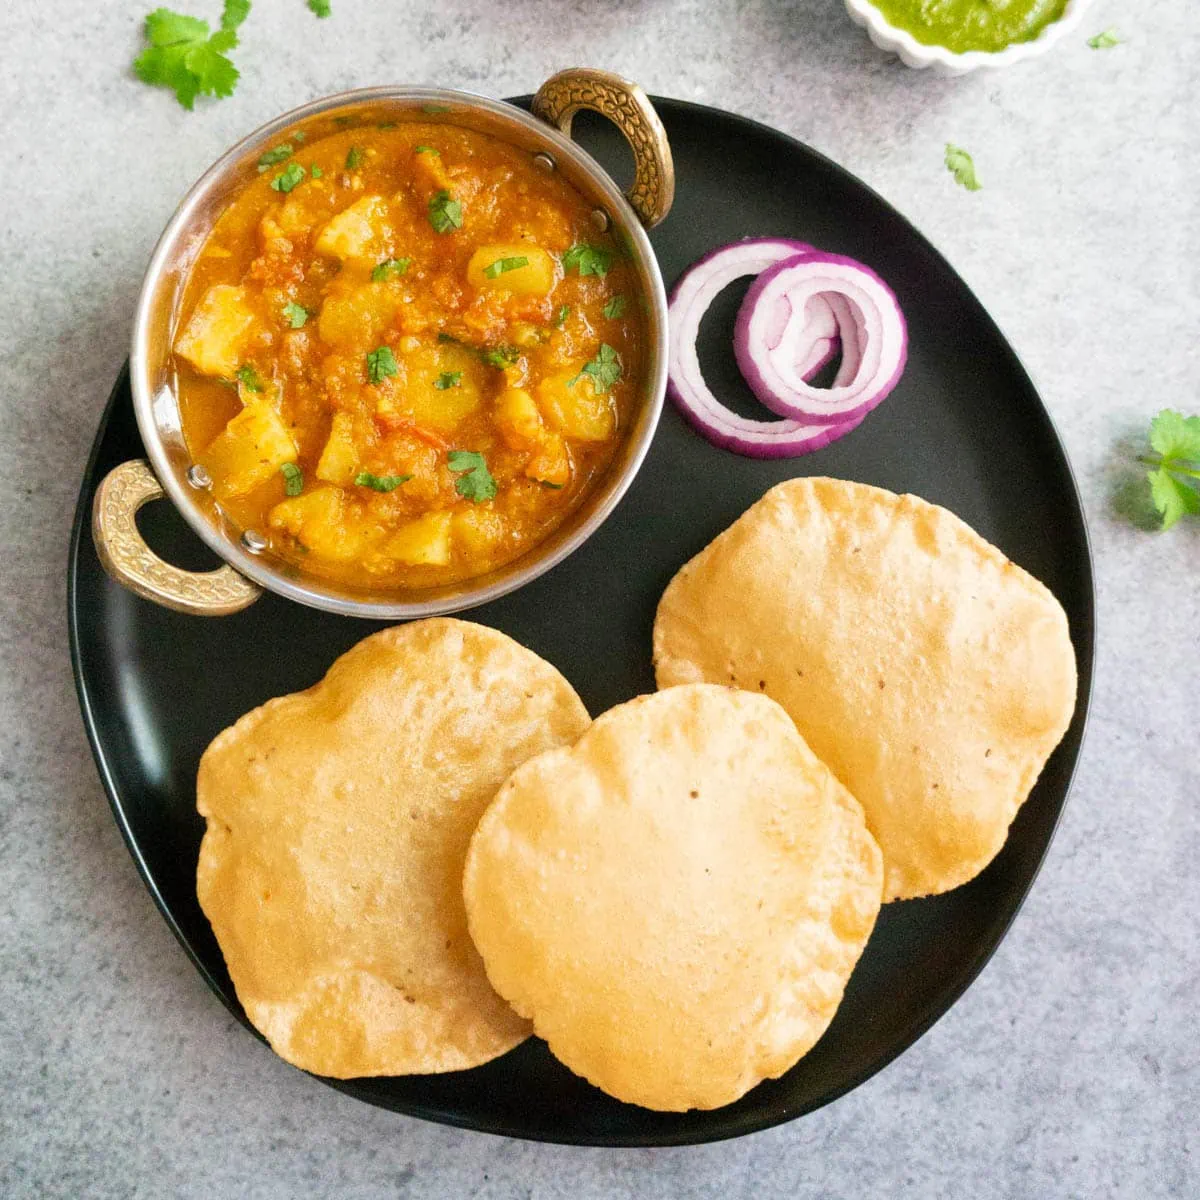 Potato Curry served with puffed Indian flatbread on a plate with red onions.